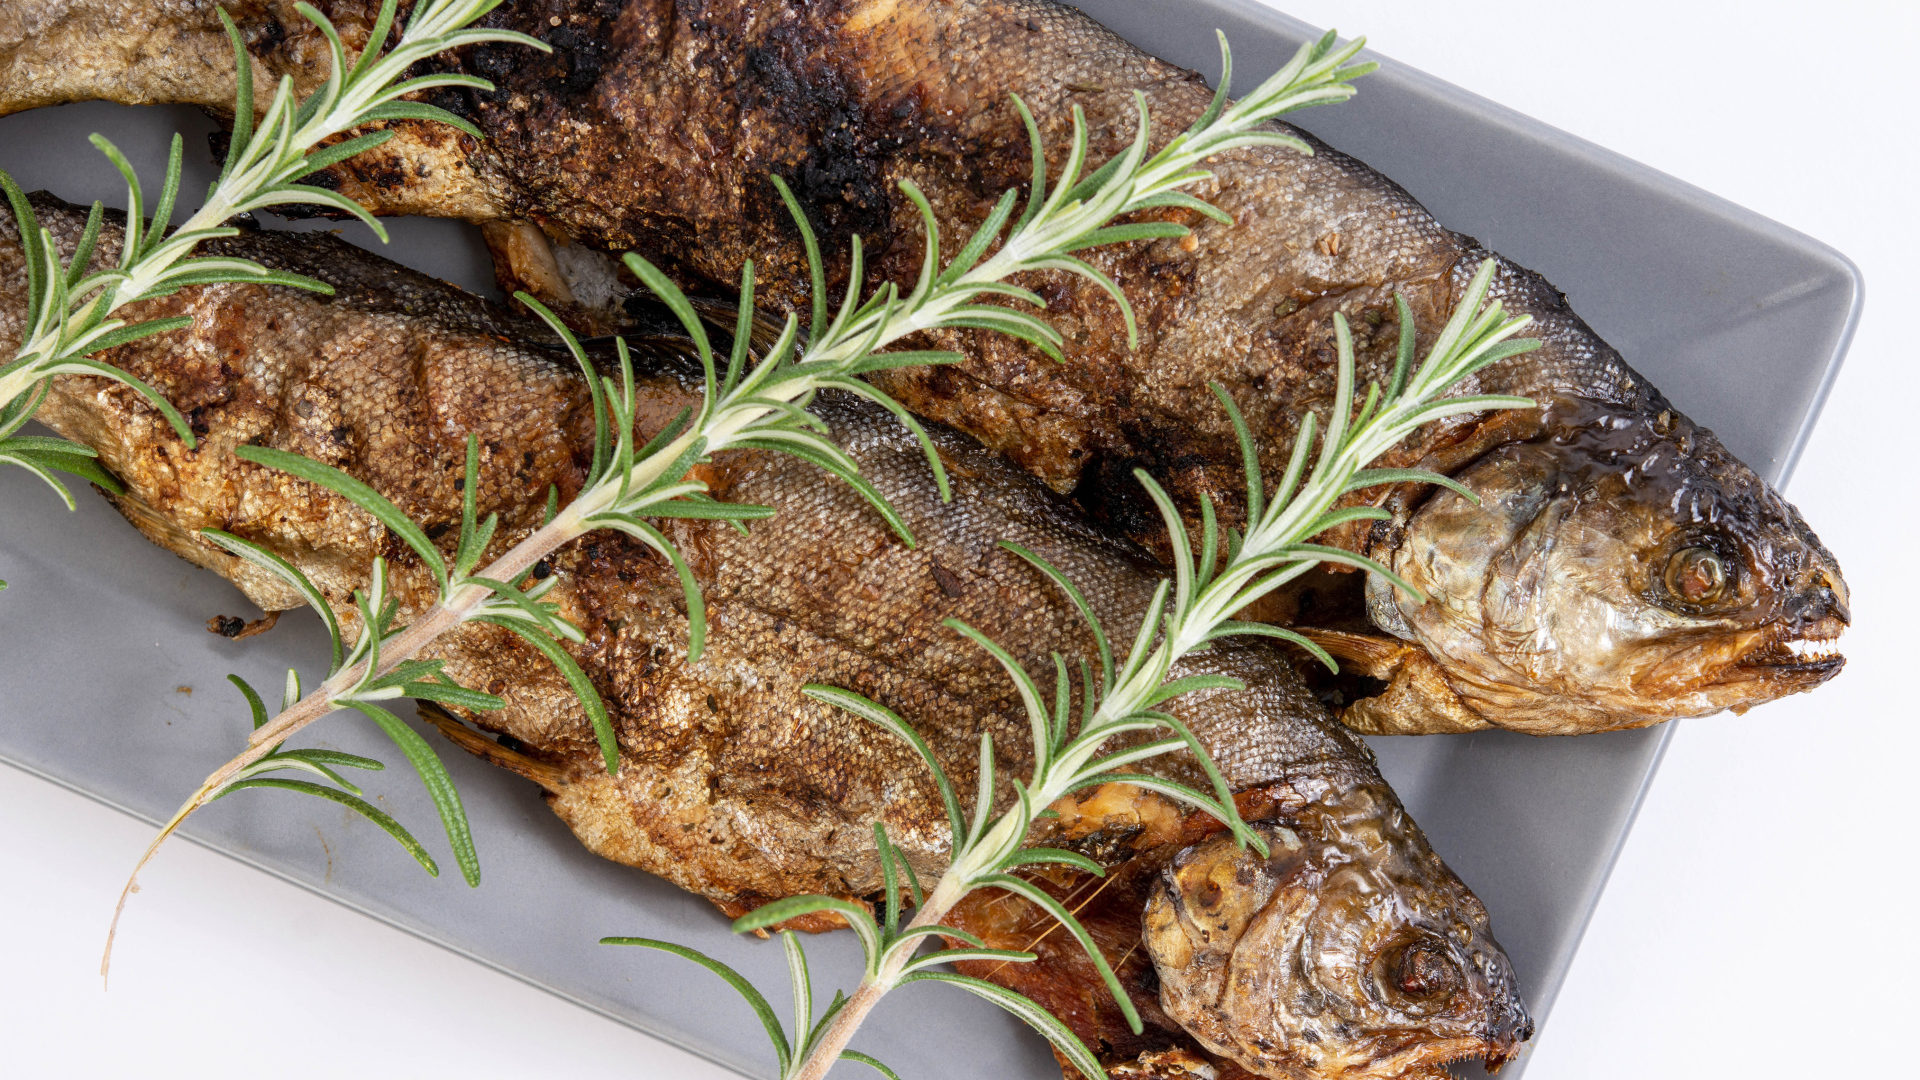 Baked fish with rosemary in a baking sheet